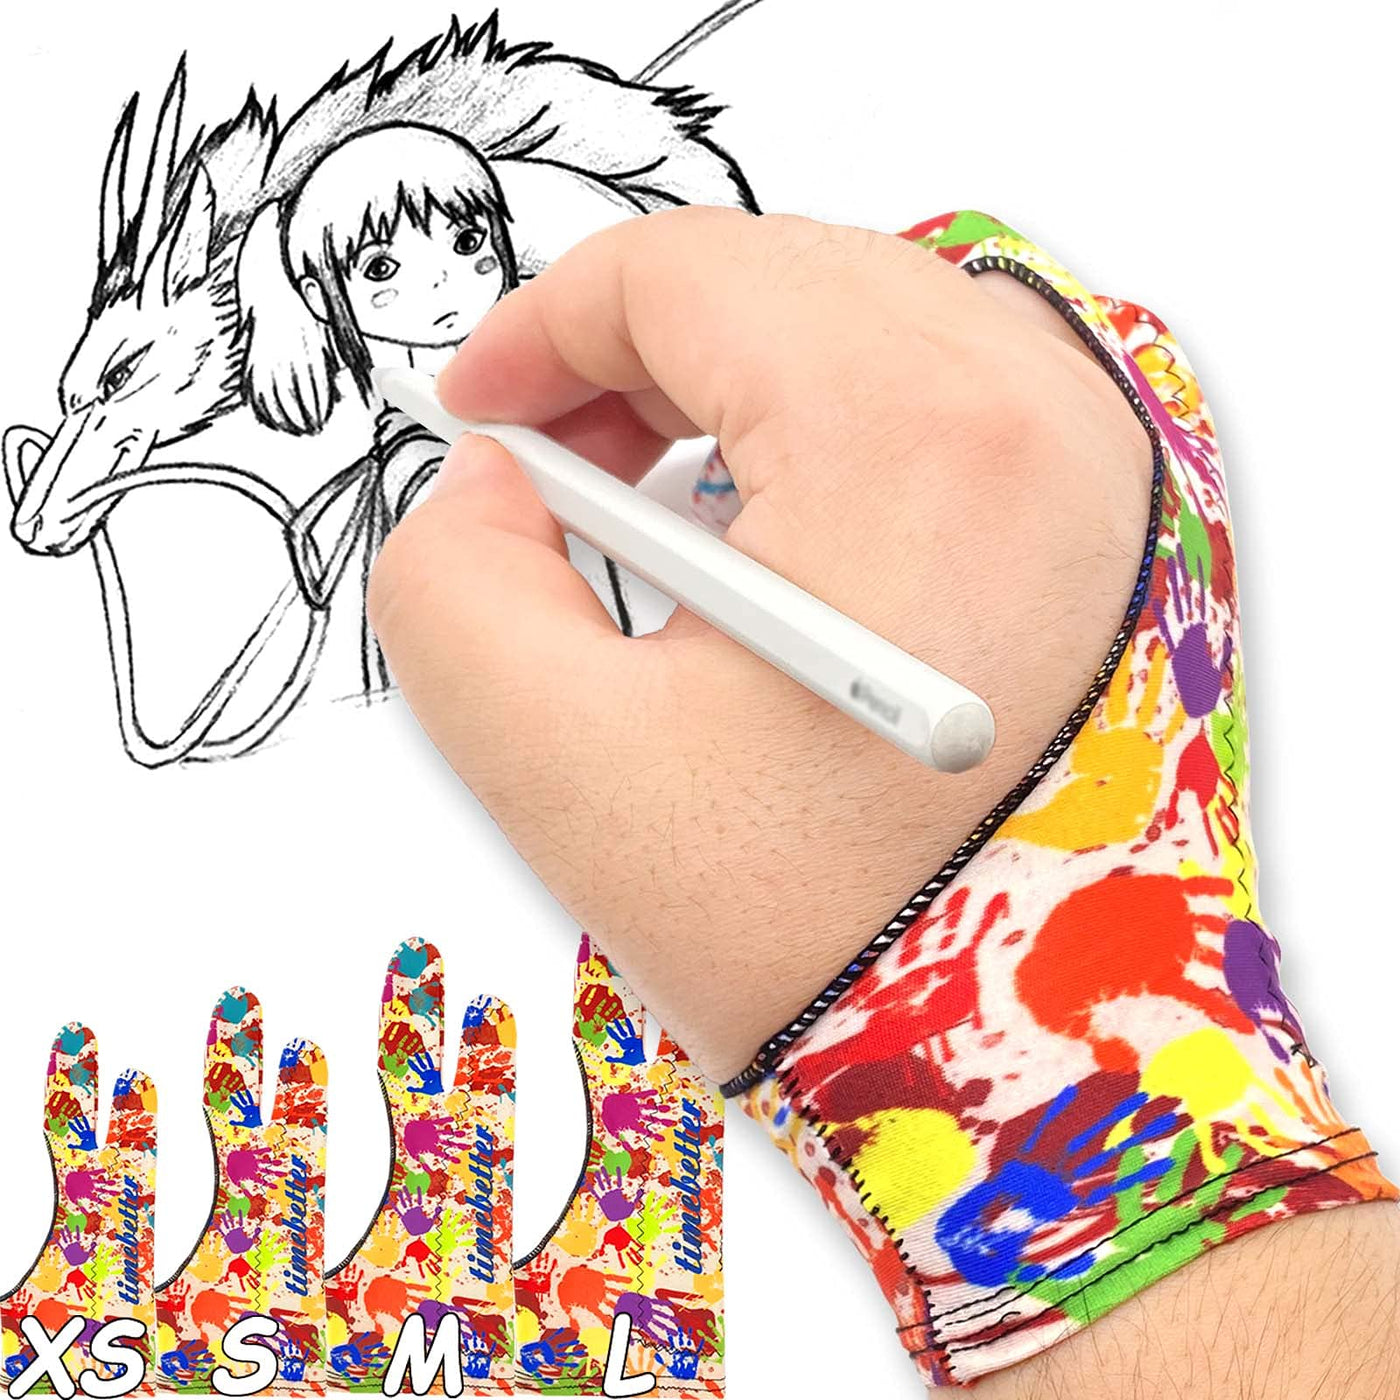 TIMEBETTER Drawing Glove M, Artist Glove for Drawing Tablet iPad, Palm  Rejection Digital Art Glove, Suitable for Left Right Hand - Colored  Handprint, 2 Pack 2-Finger, Colored Handprints